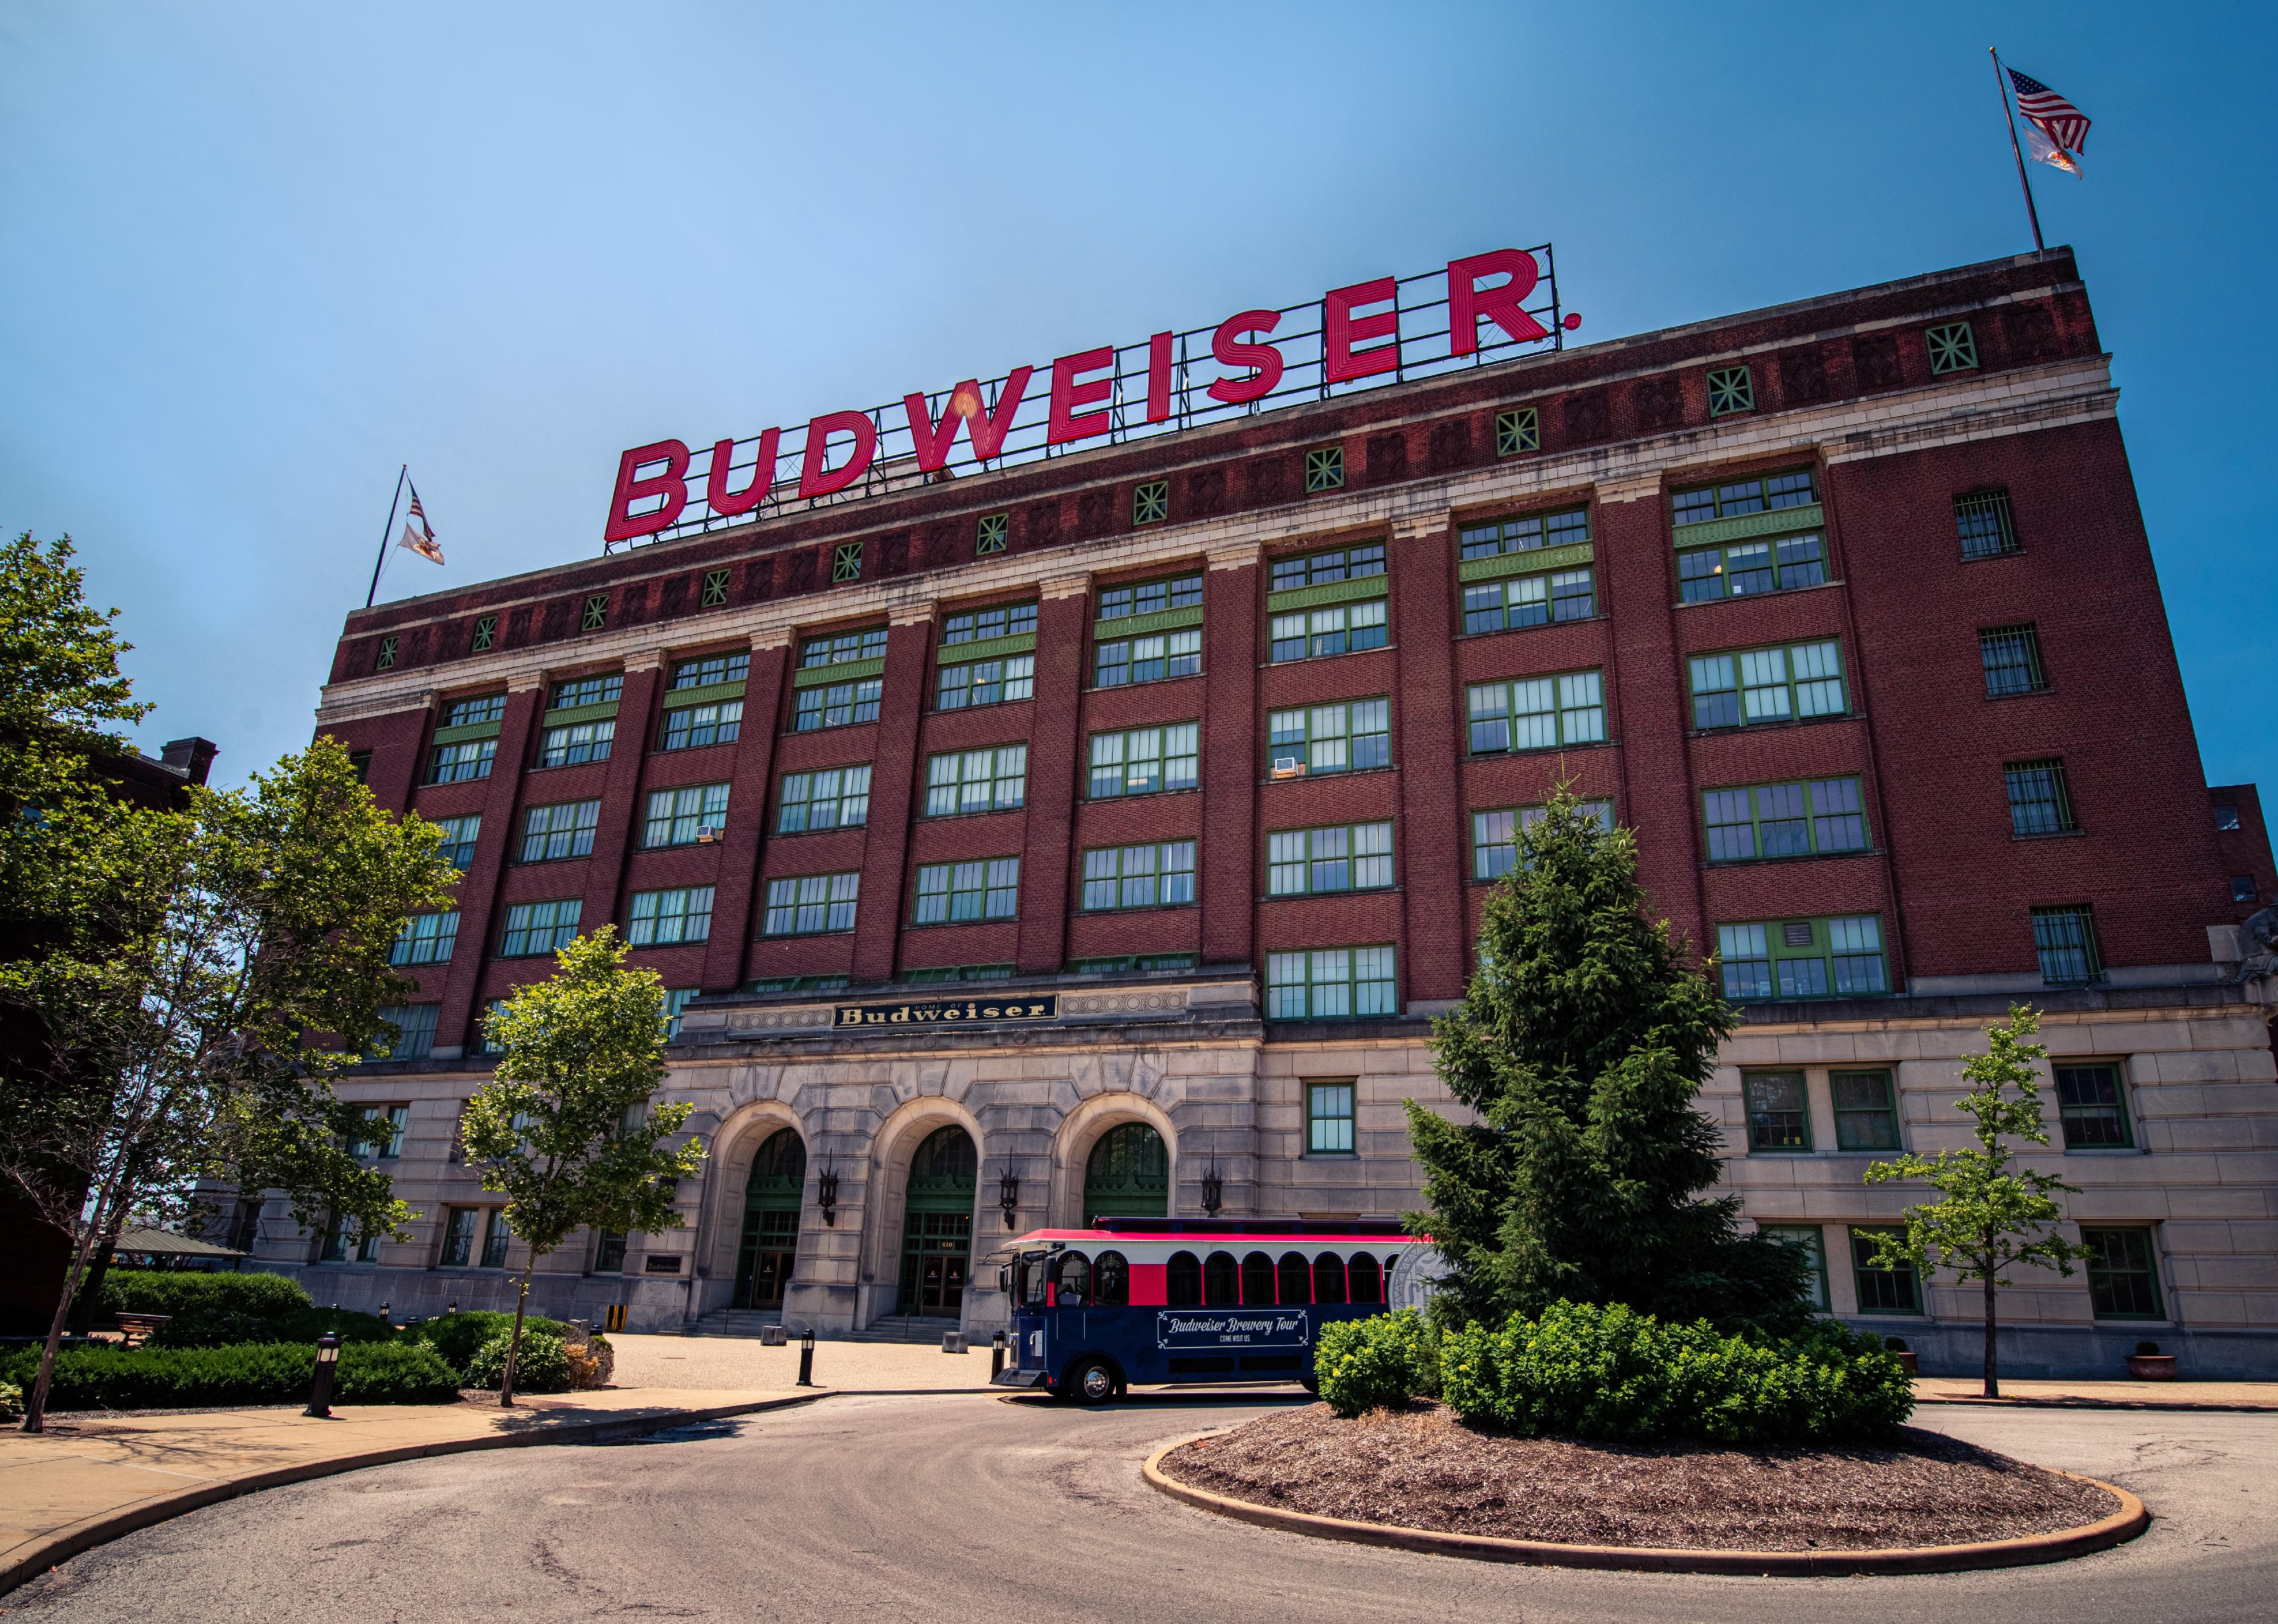 Budweiser sign on roof at the Anheuser Busch Brewery